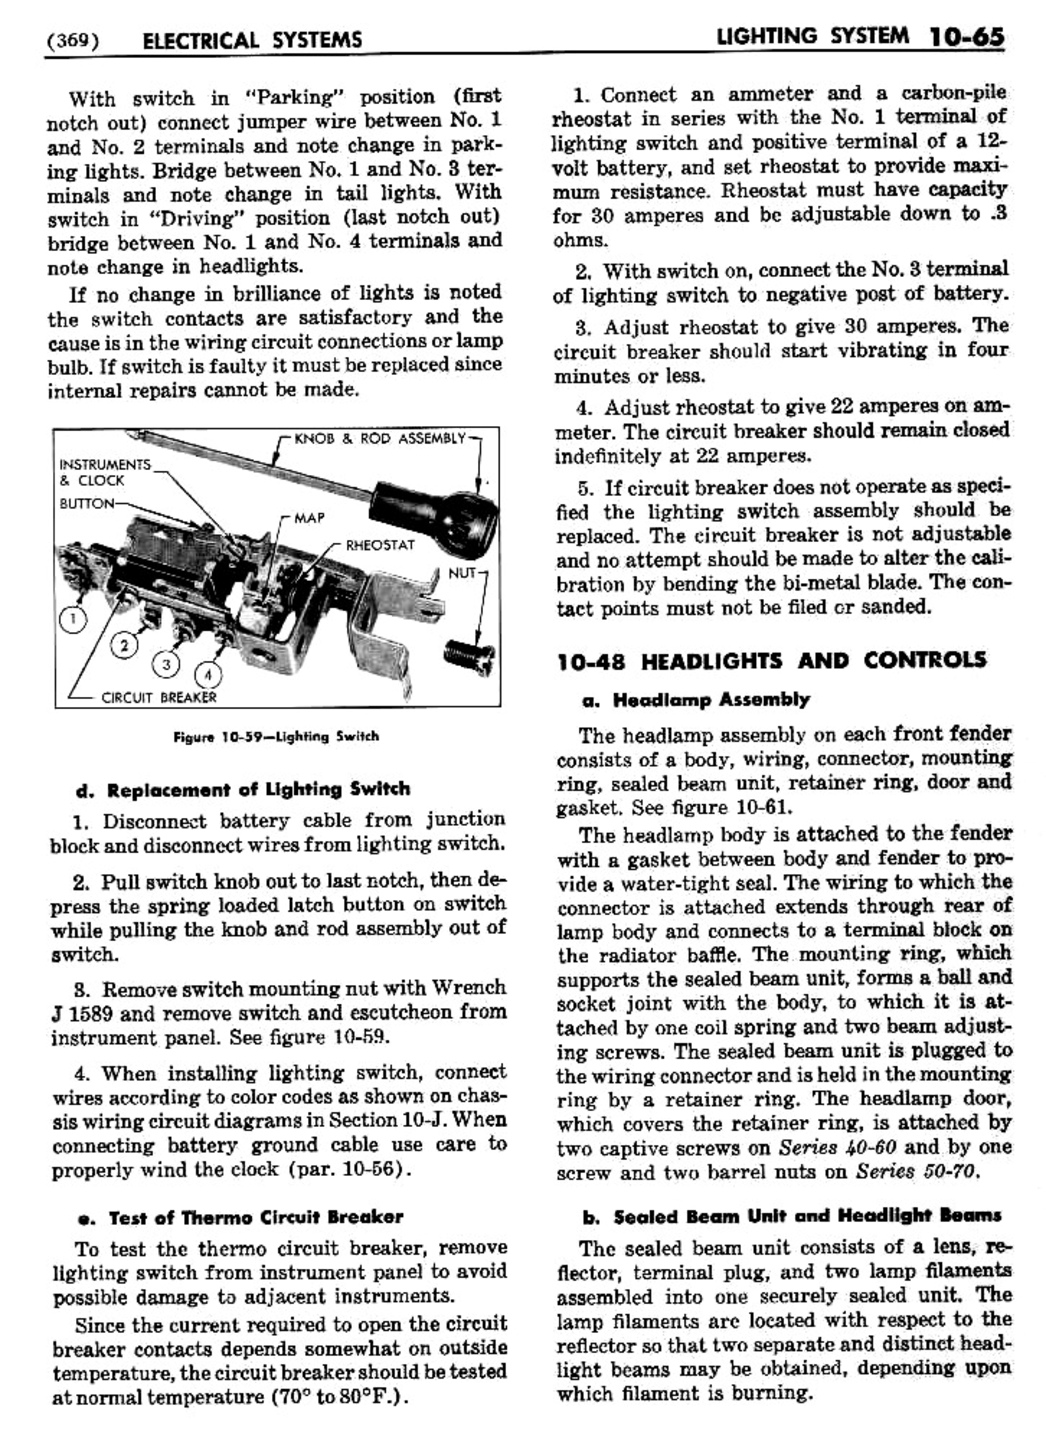 n_11 1955 Buick Shop Manual - Electrical Systems-065-065.jpg